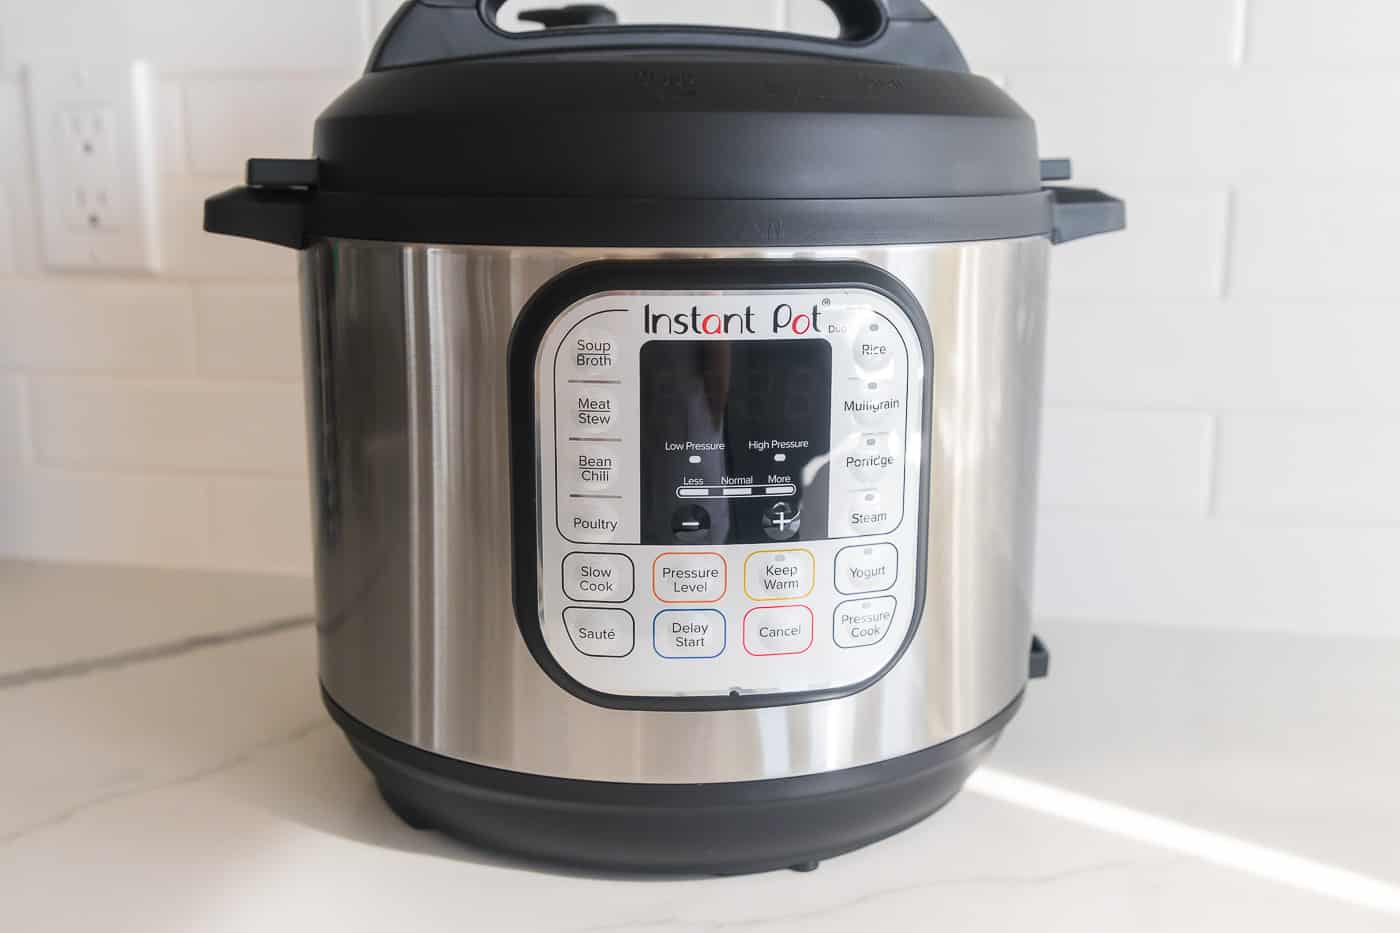 https://www.cleaneatingkitchen.com/wp-content/uploads/2018/11/how-to-use-instant-pot-duo-1.jpg